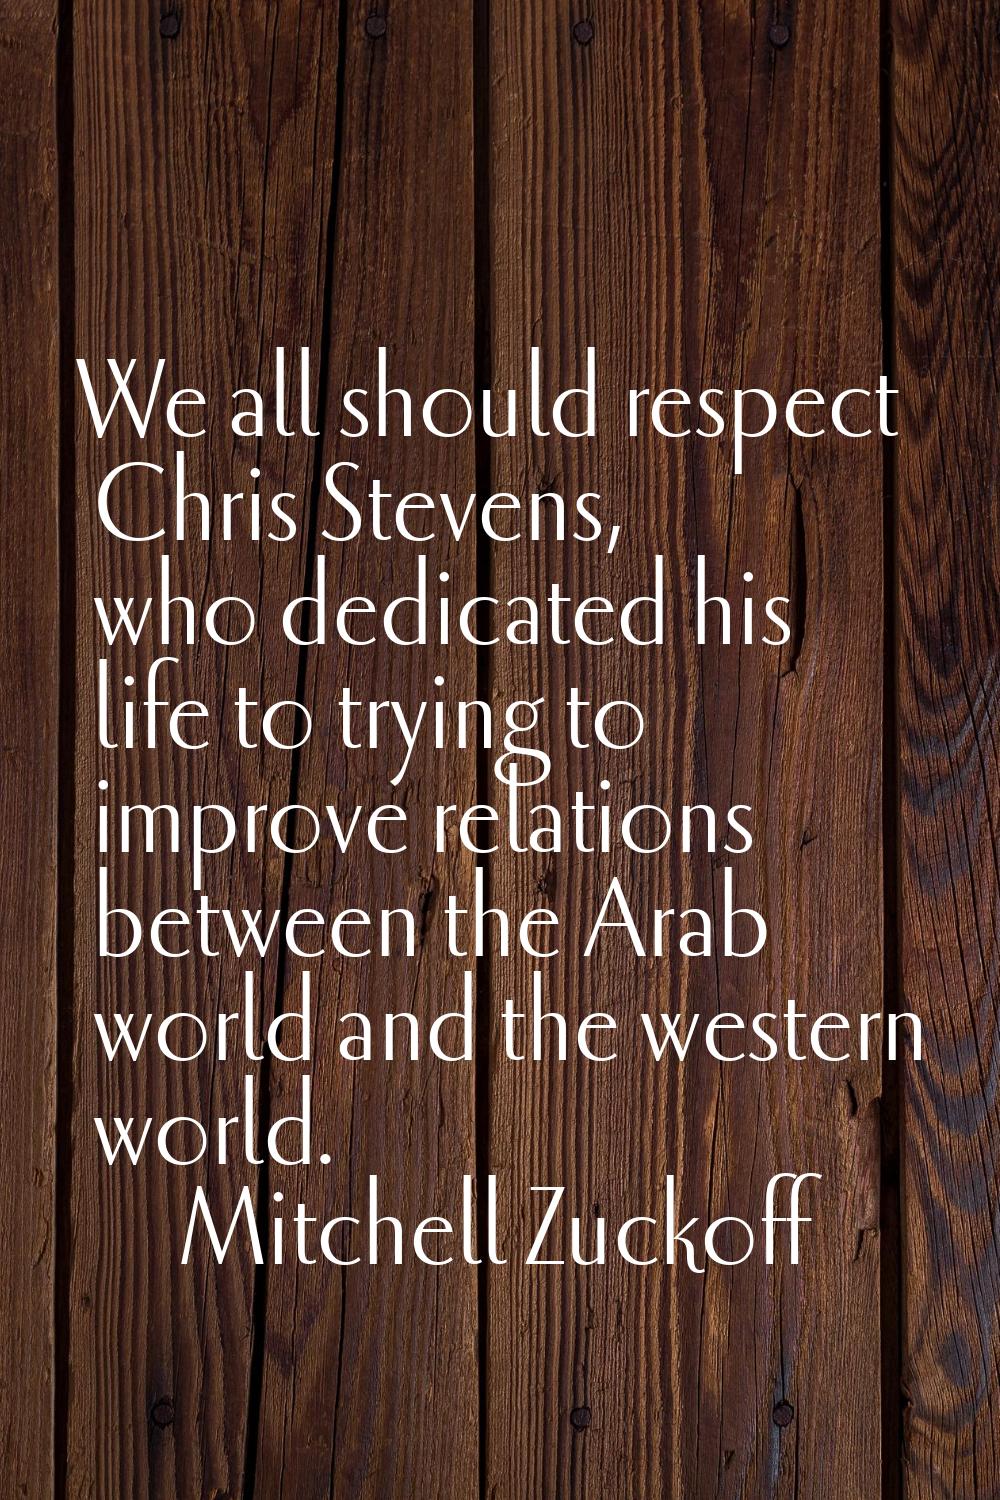 We all should respect Chris Stevens, who dedicated his life to trying to improve relations between 